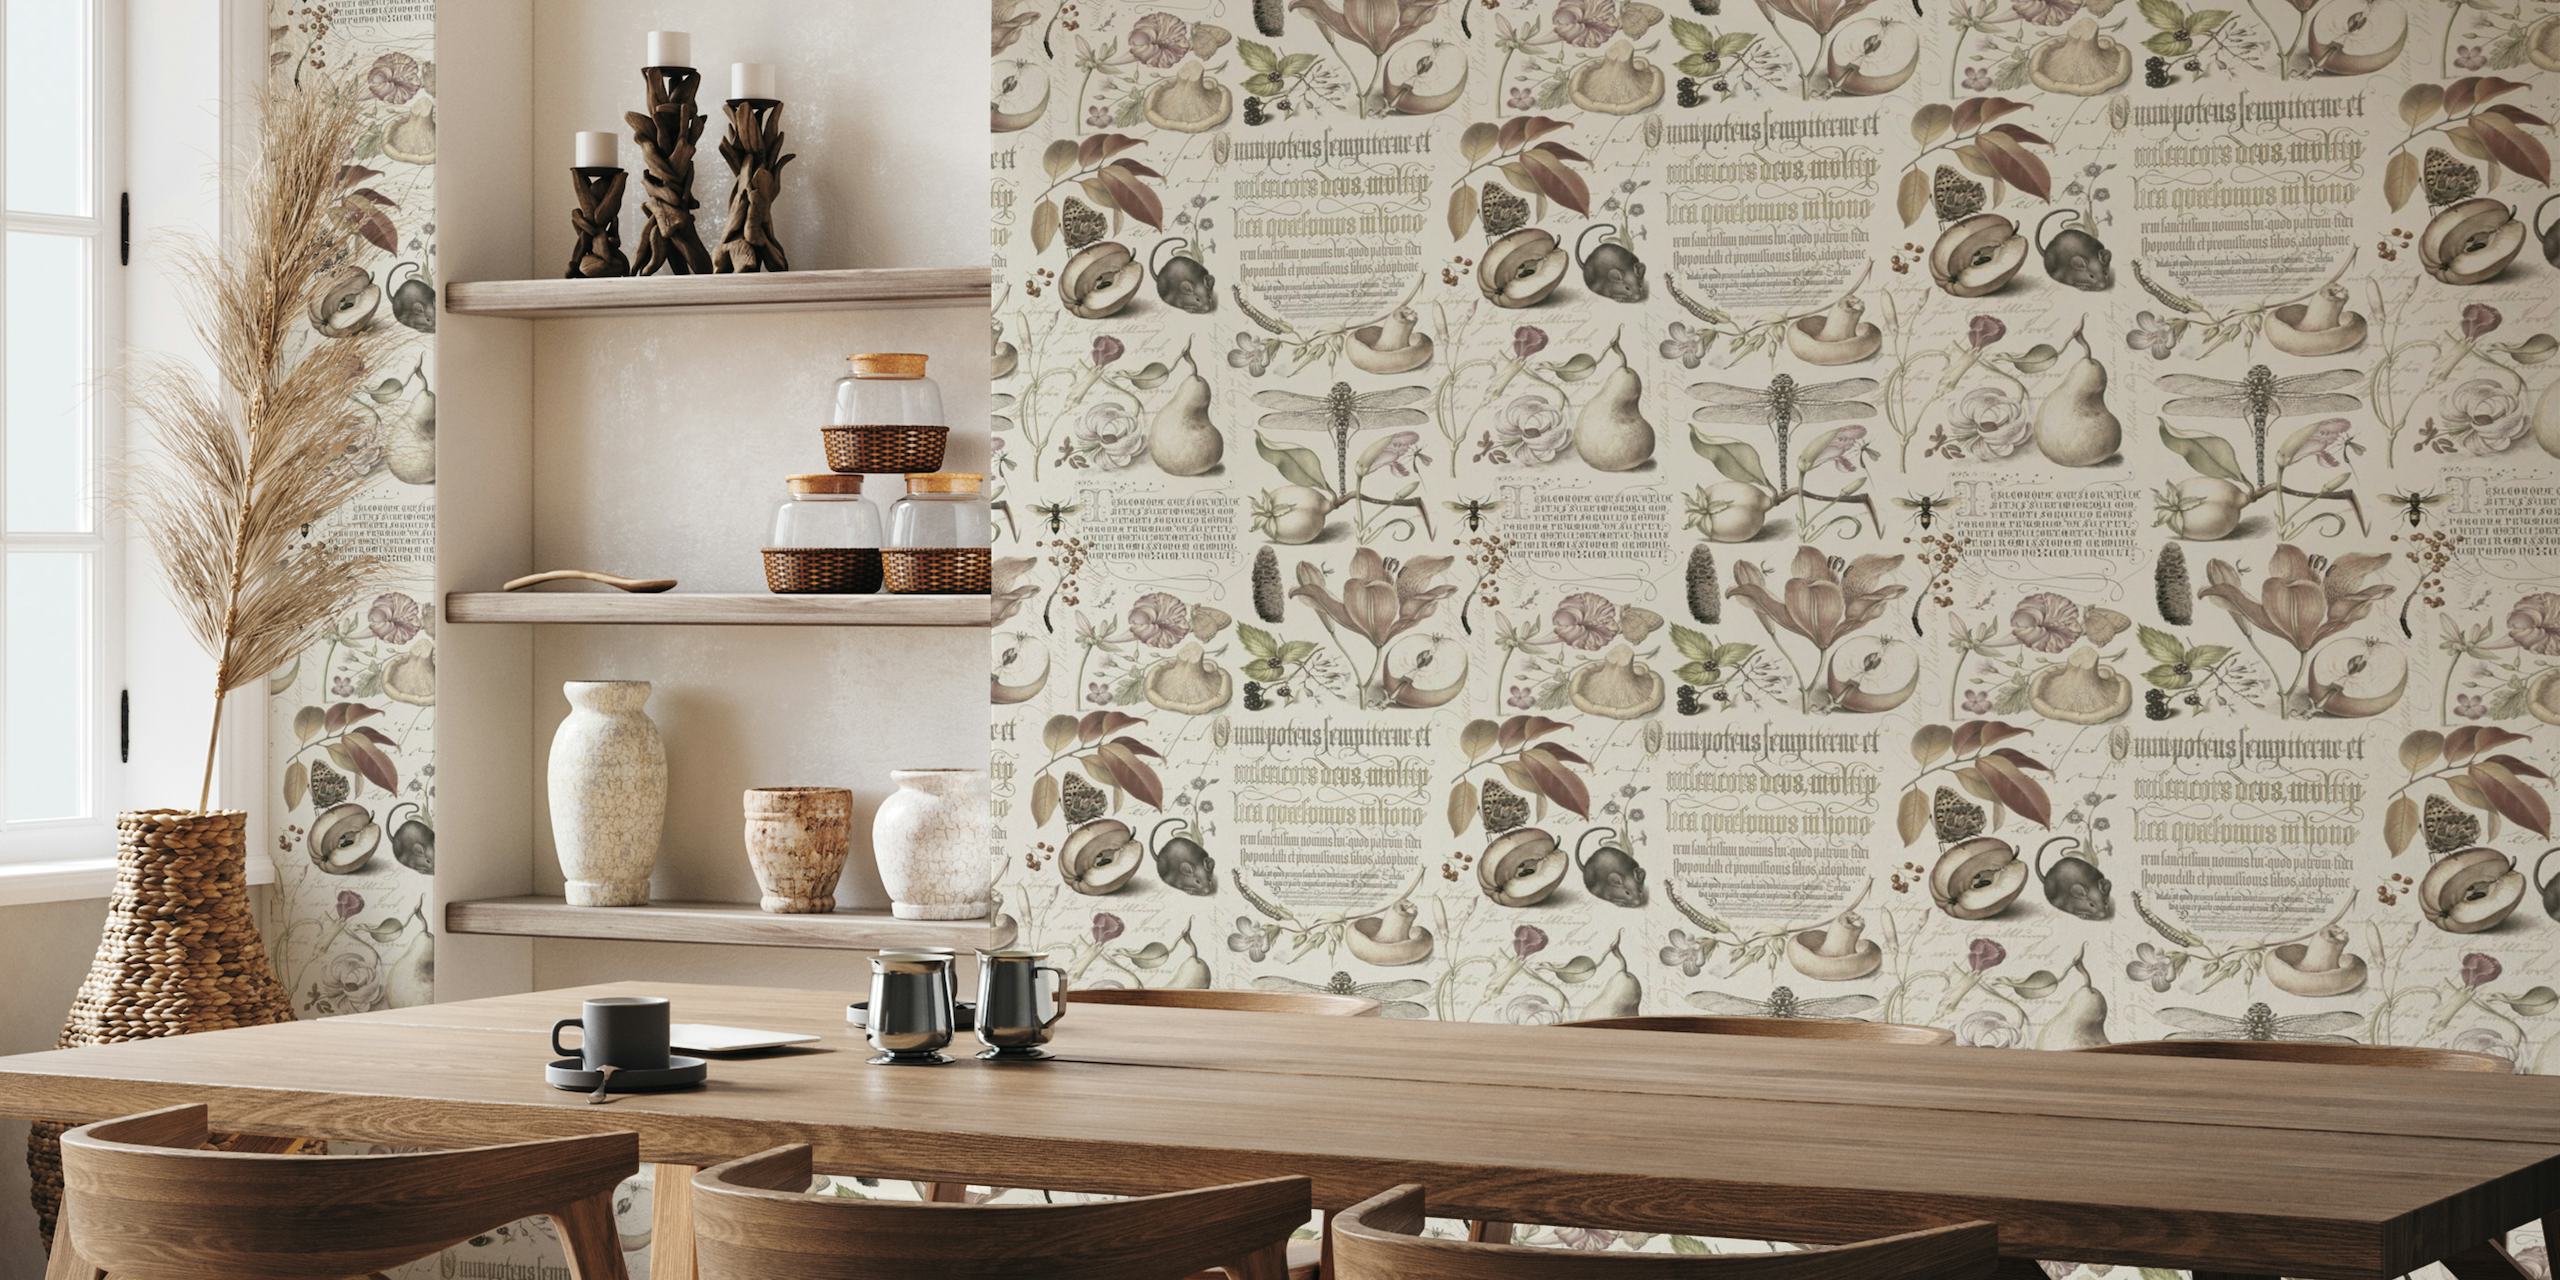 Botanical Treasures By Joris Hoefnagel With Plants, Fruits And Calligraphy Neutral Beige papel pintado